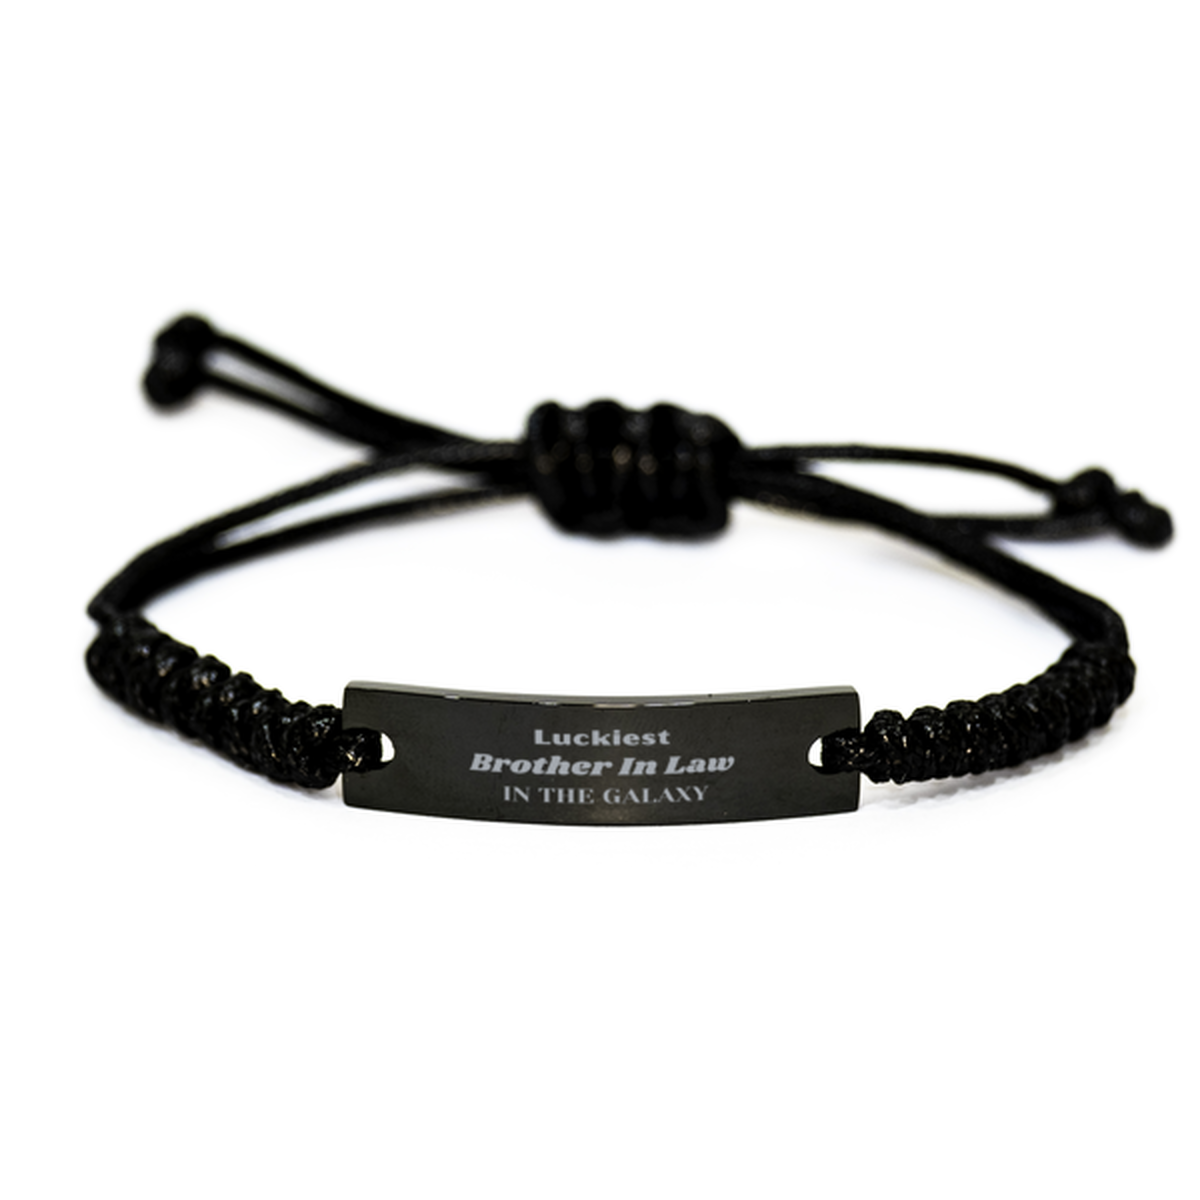 Luckiest Brother In Law in the Galaxy, To My Brother In Law Engraved Gifts, Christmas Brother In Law Black Rope Bracelet Gifts, X-mas Birthday Unique Gifts For Brother In Law Men Women